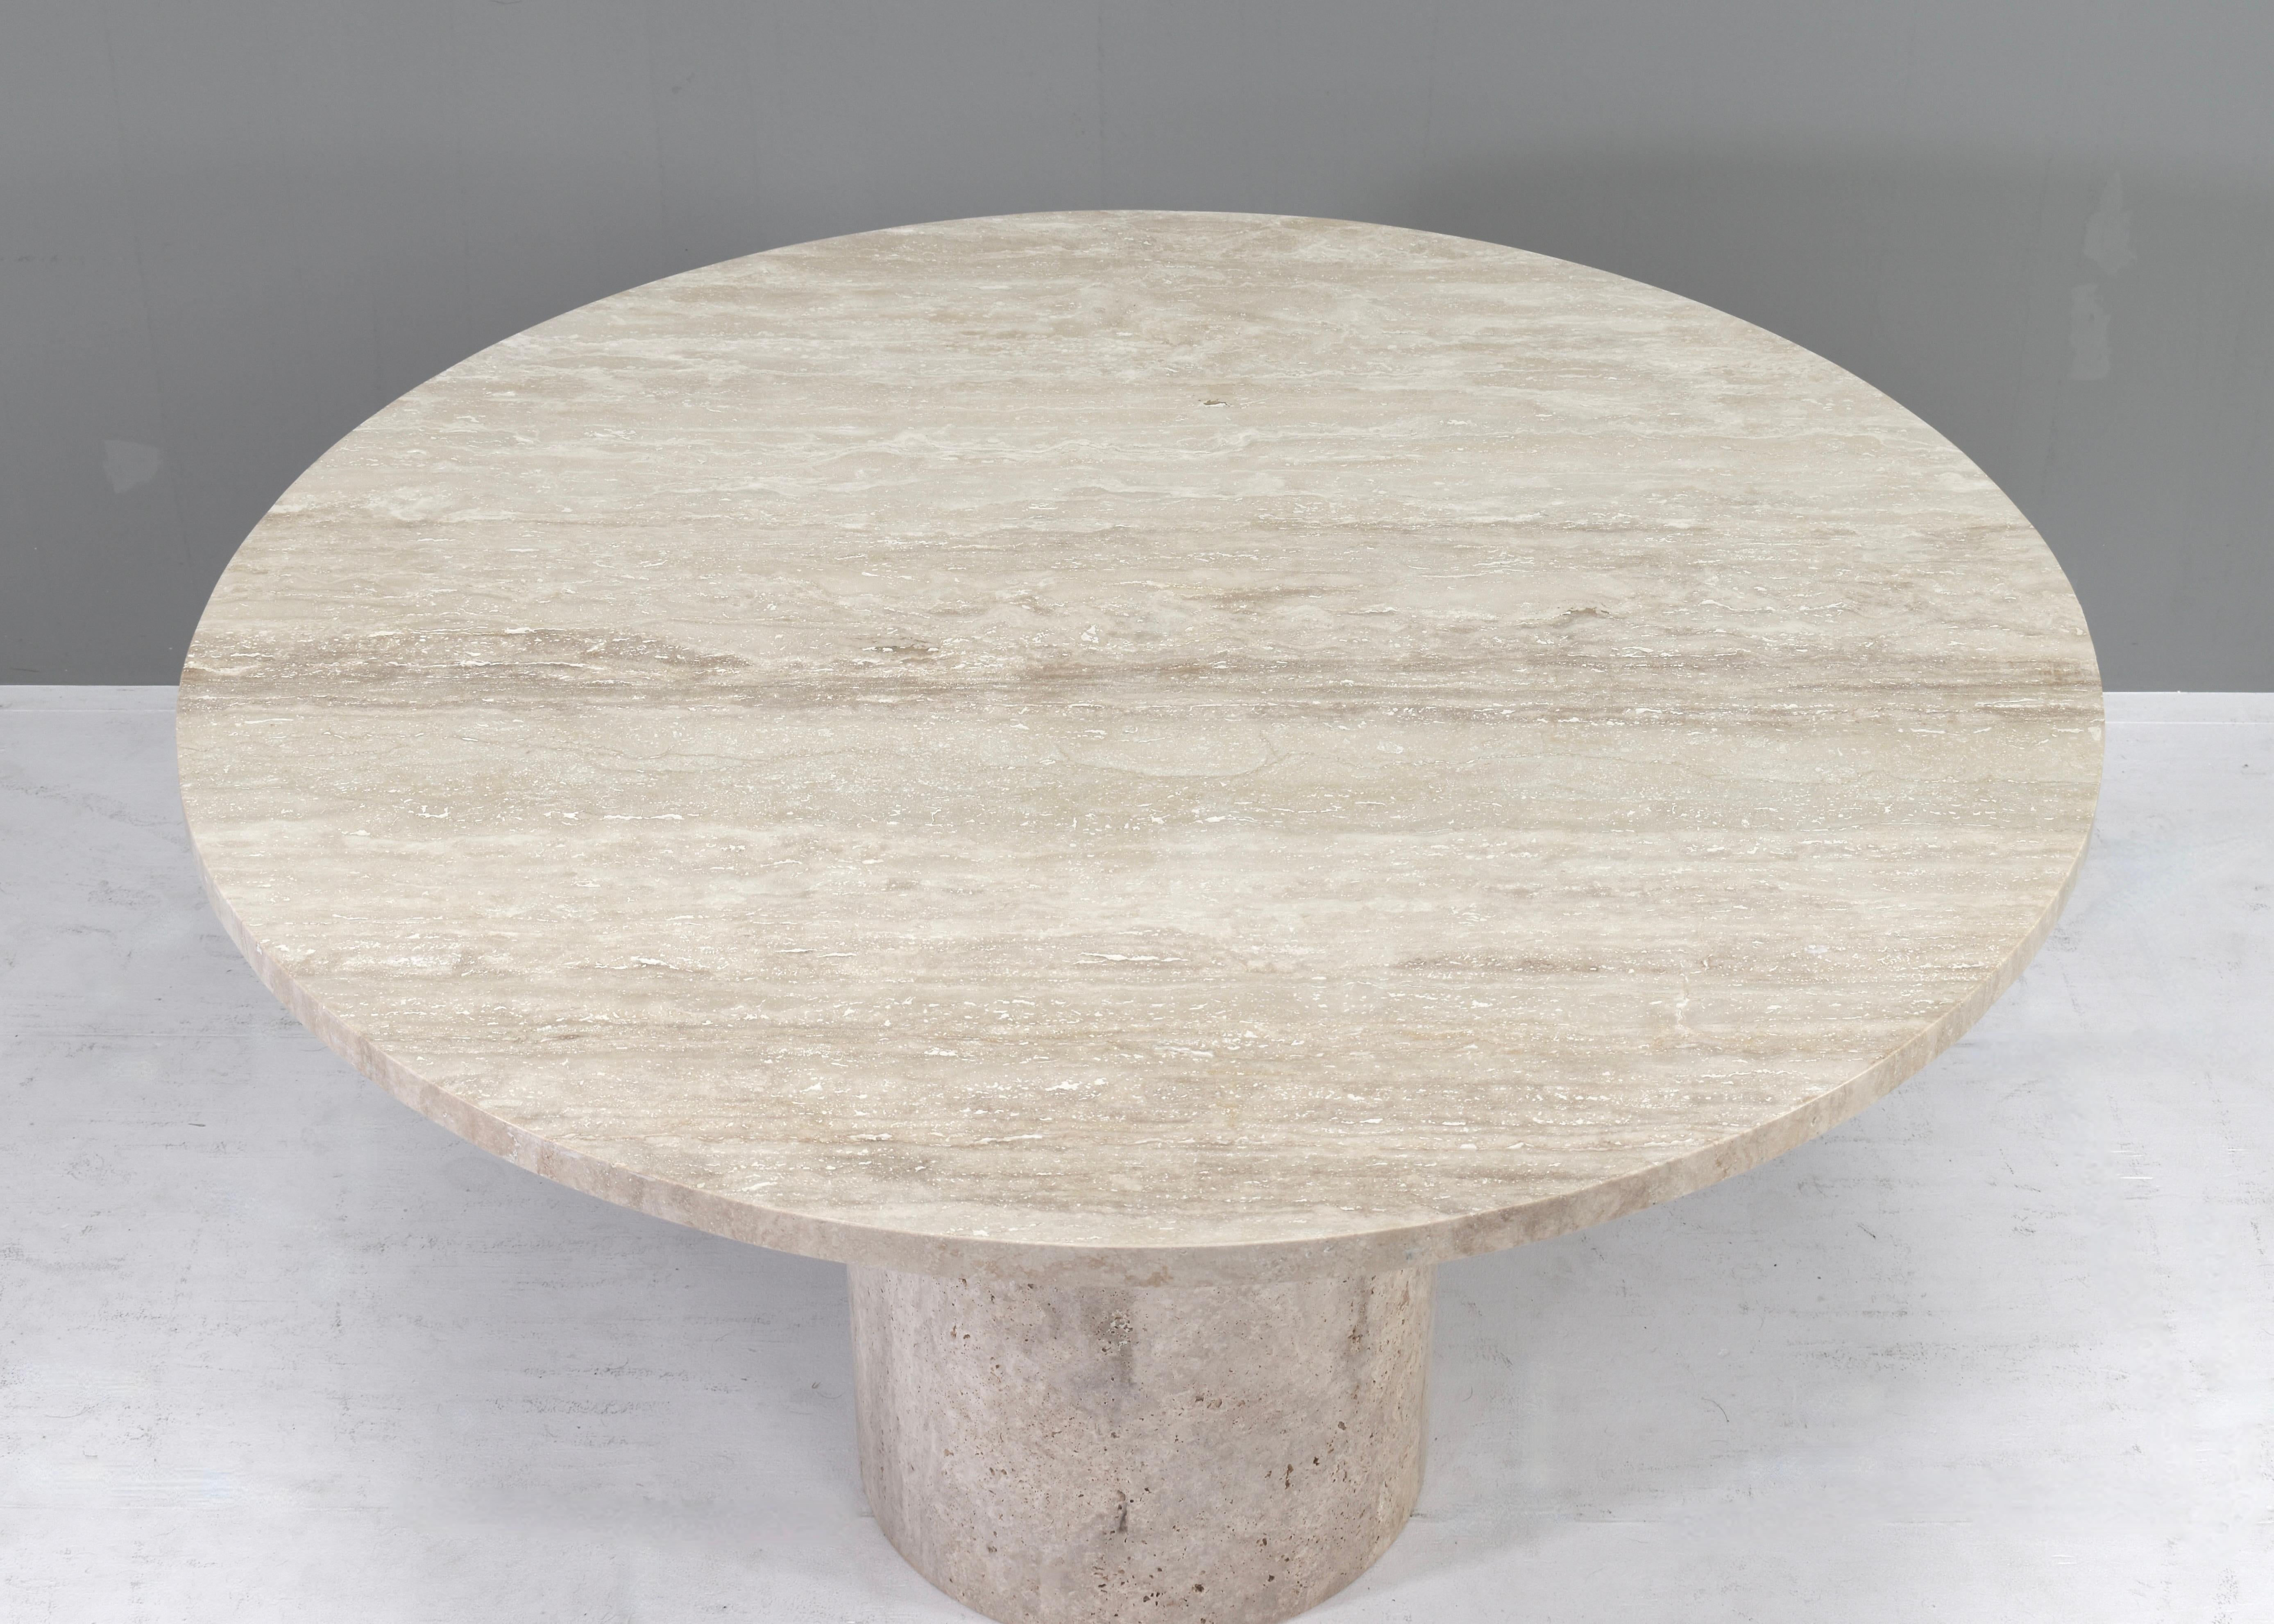 Exquisite Round Travertine Dining Table in the manor of Up& Up and Mangiarotti 4